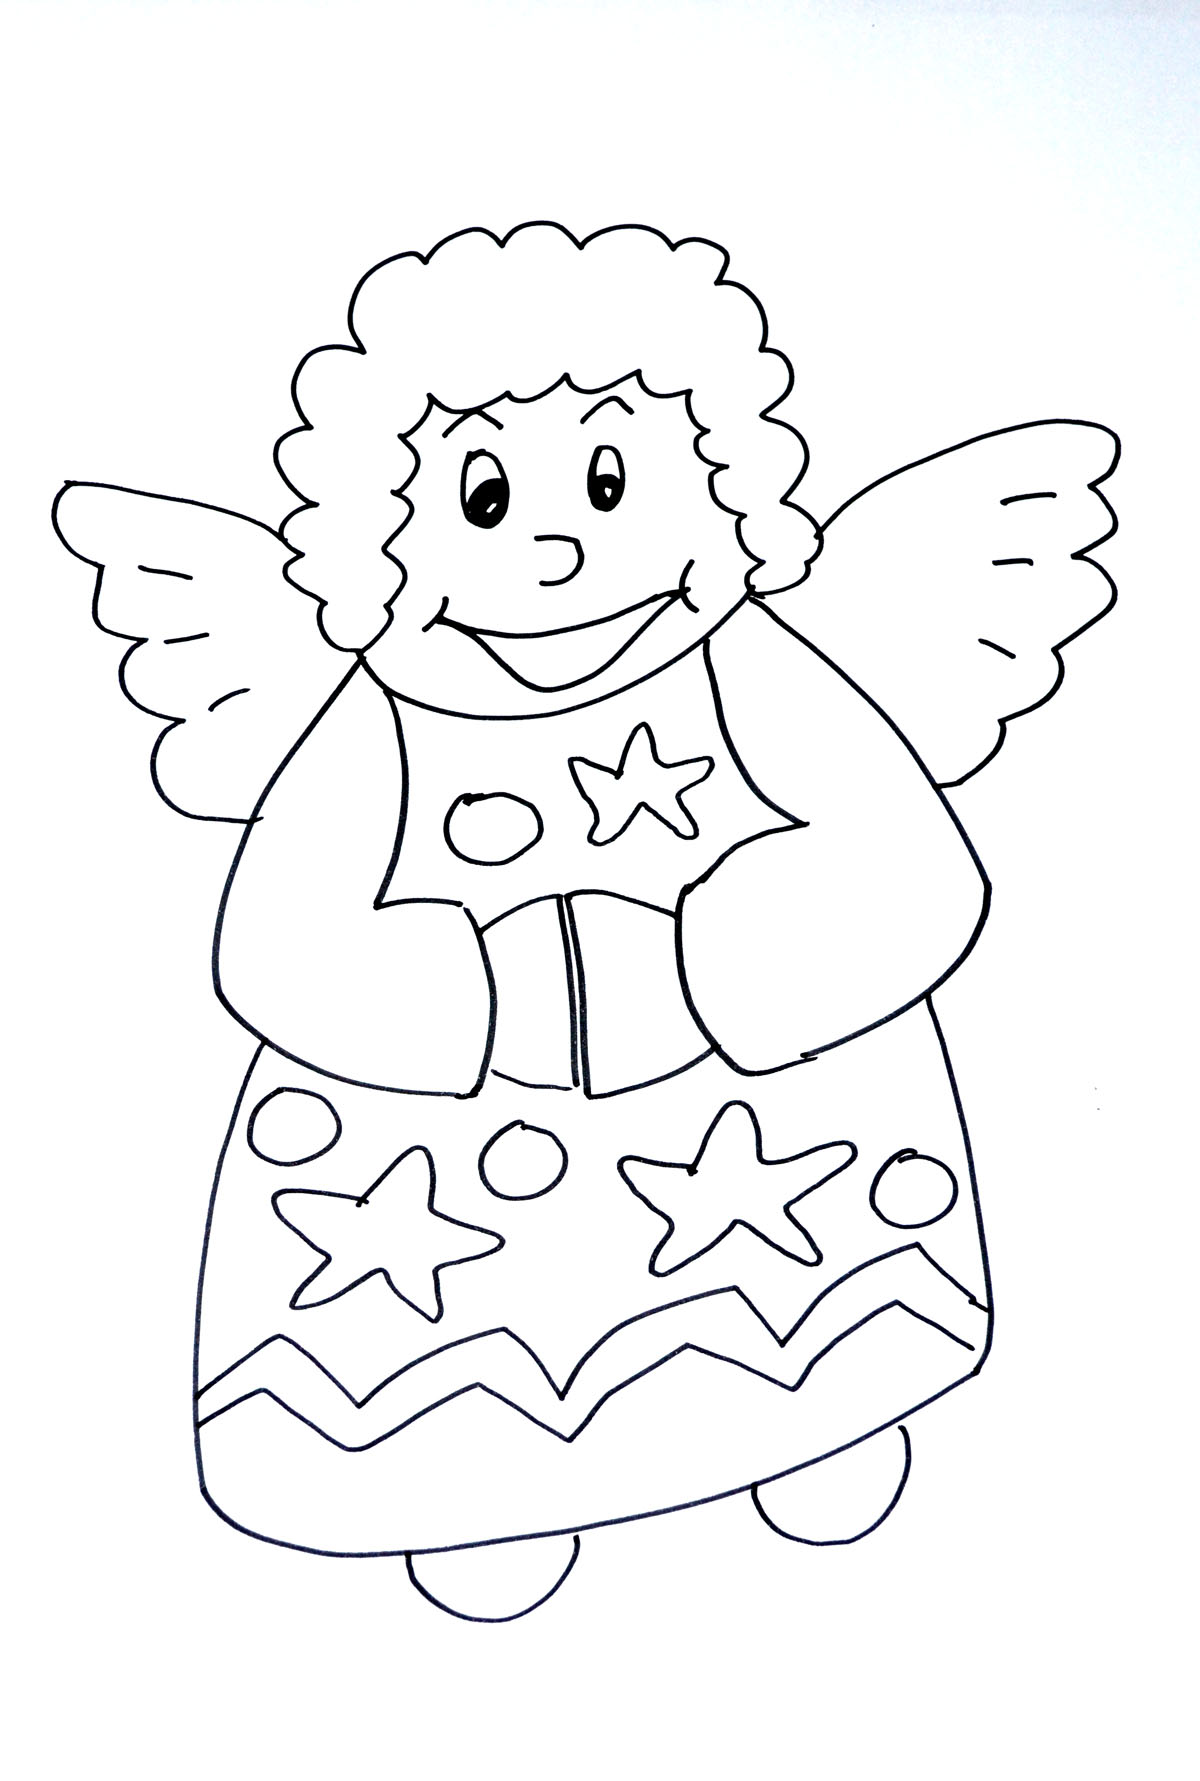 Drawing of a Christmas Angel to color